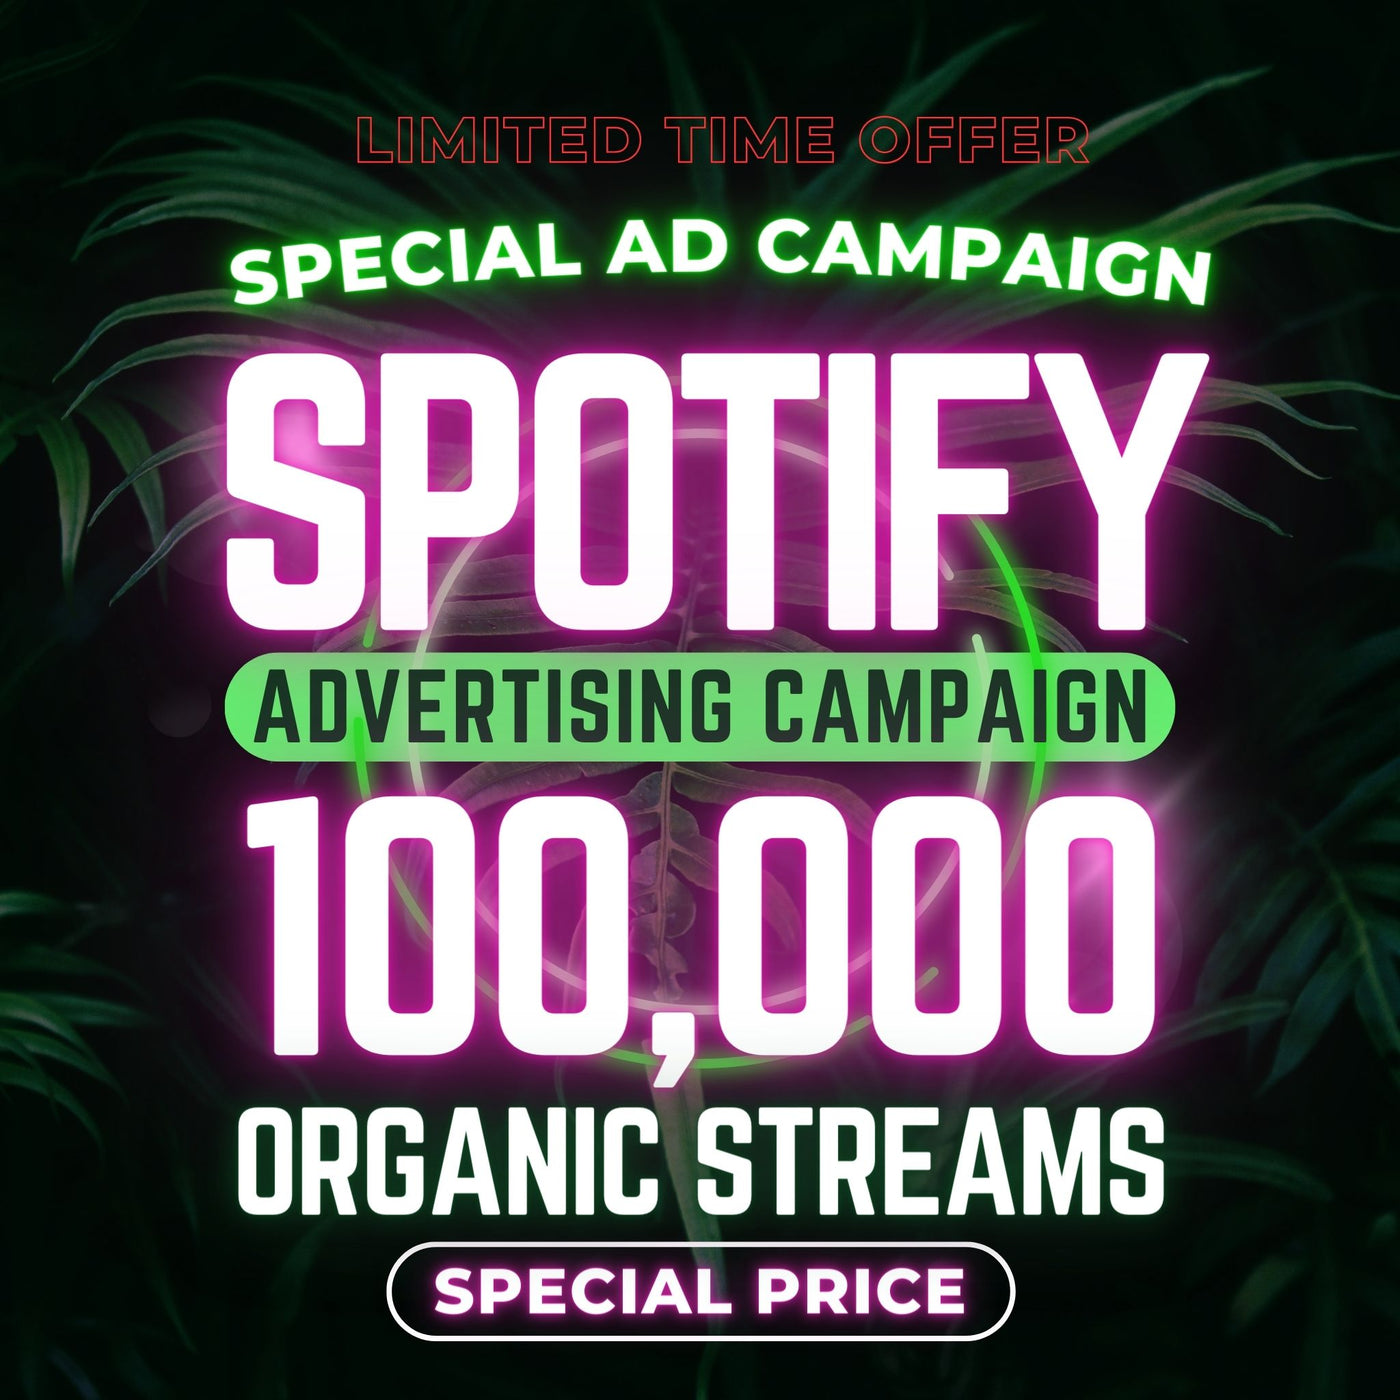 Special Spotify Ad Campaign up to 100,000 Streams